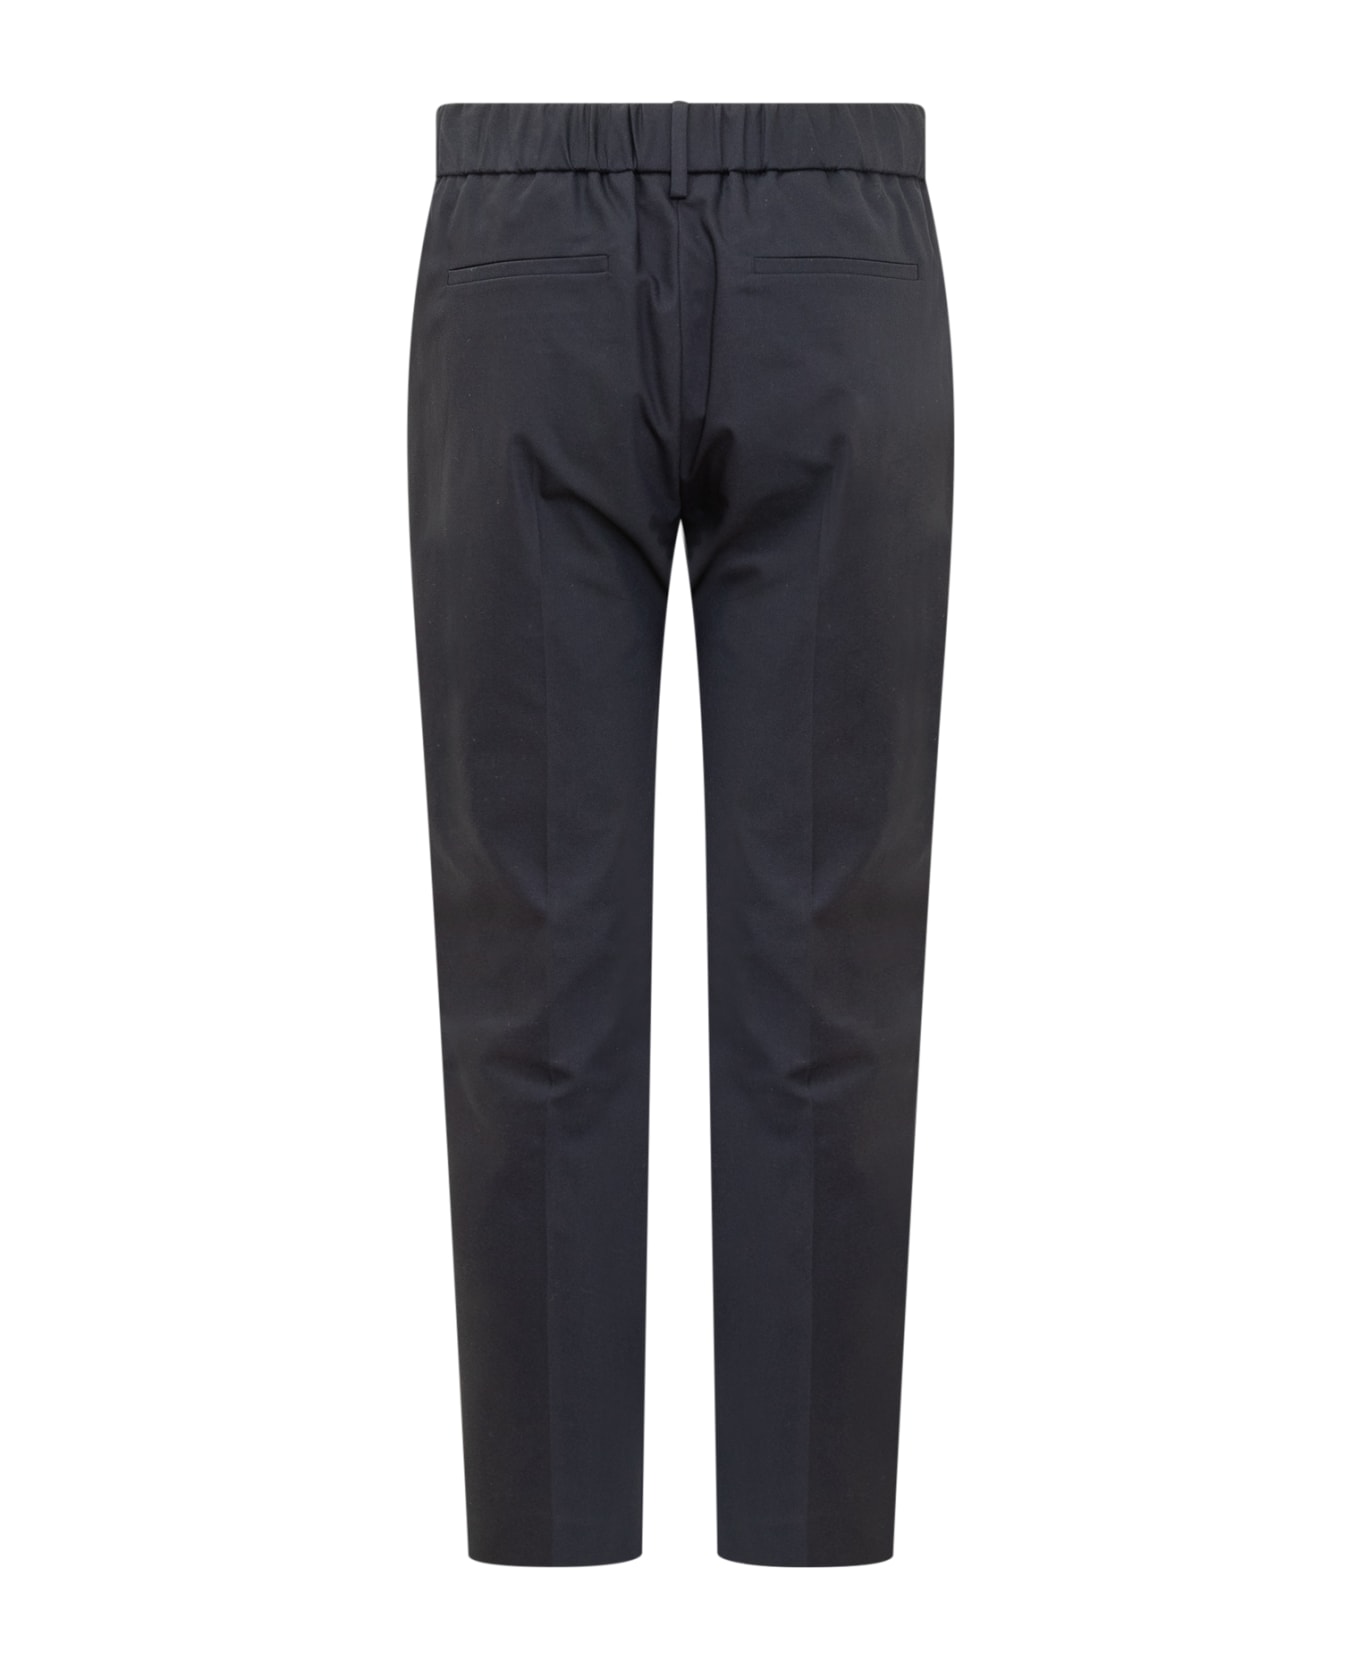 Brunello Cucinelli Stretch Cotton Trousers With Elastic Waistband And Small Pleats On The Front - Midnight